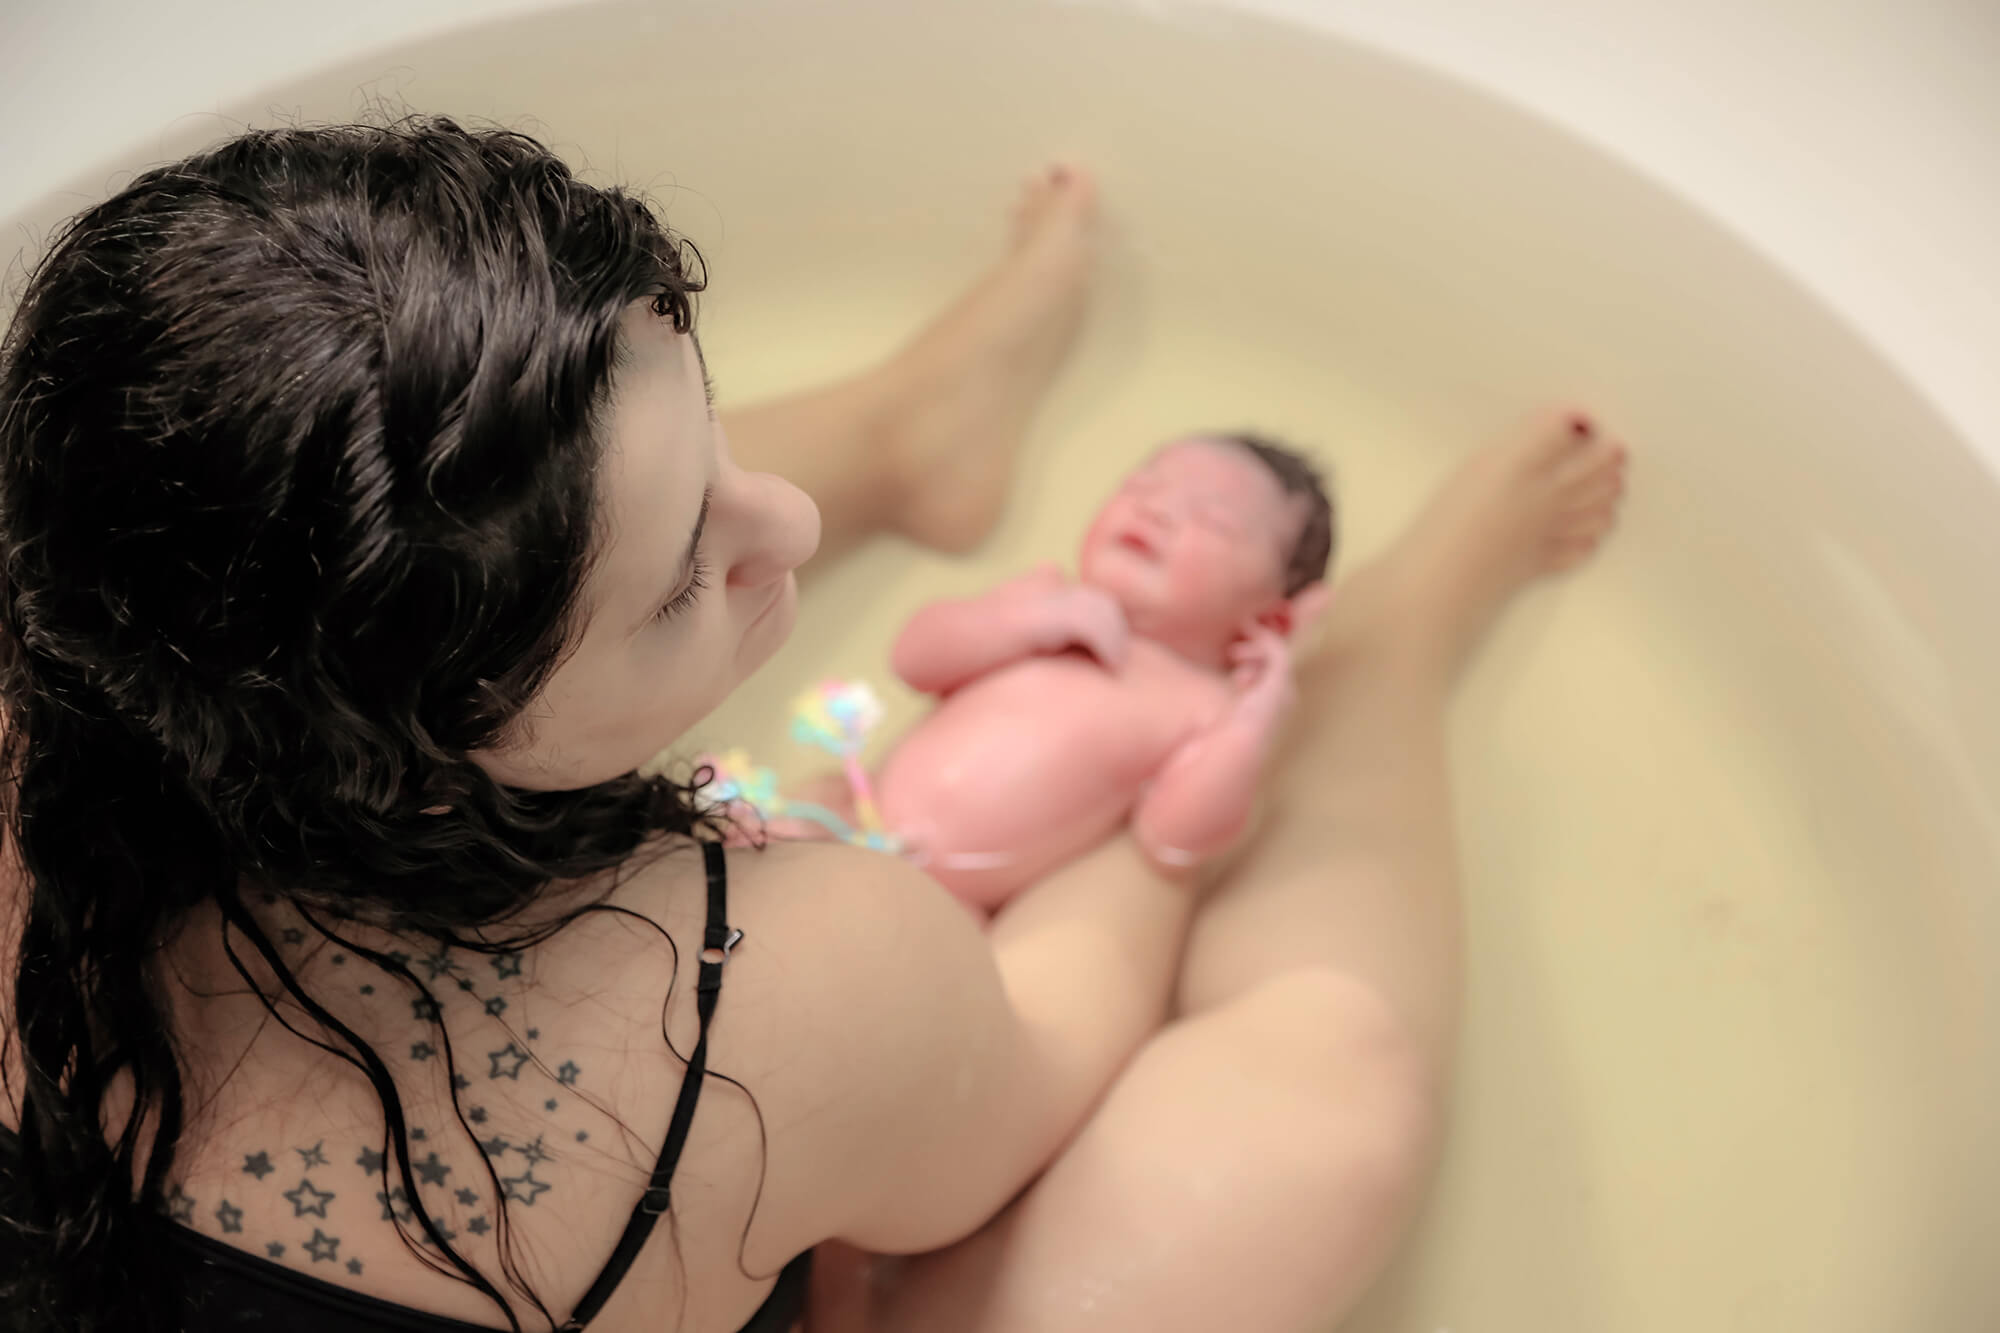 Mom and her newborn baby girl enjoying a hot bath prepared for one of the amazing doulas in Houston